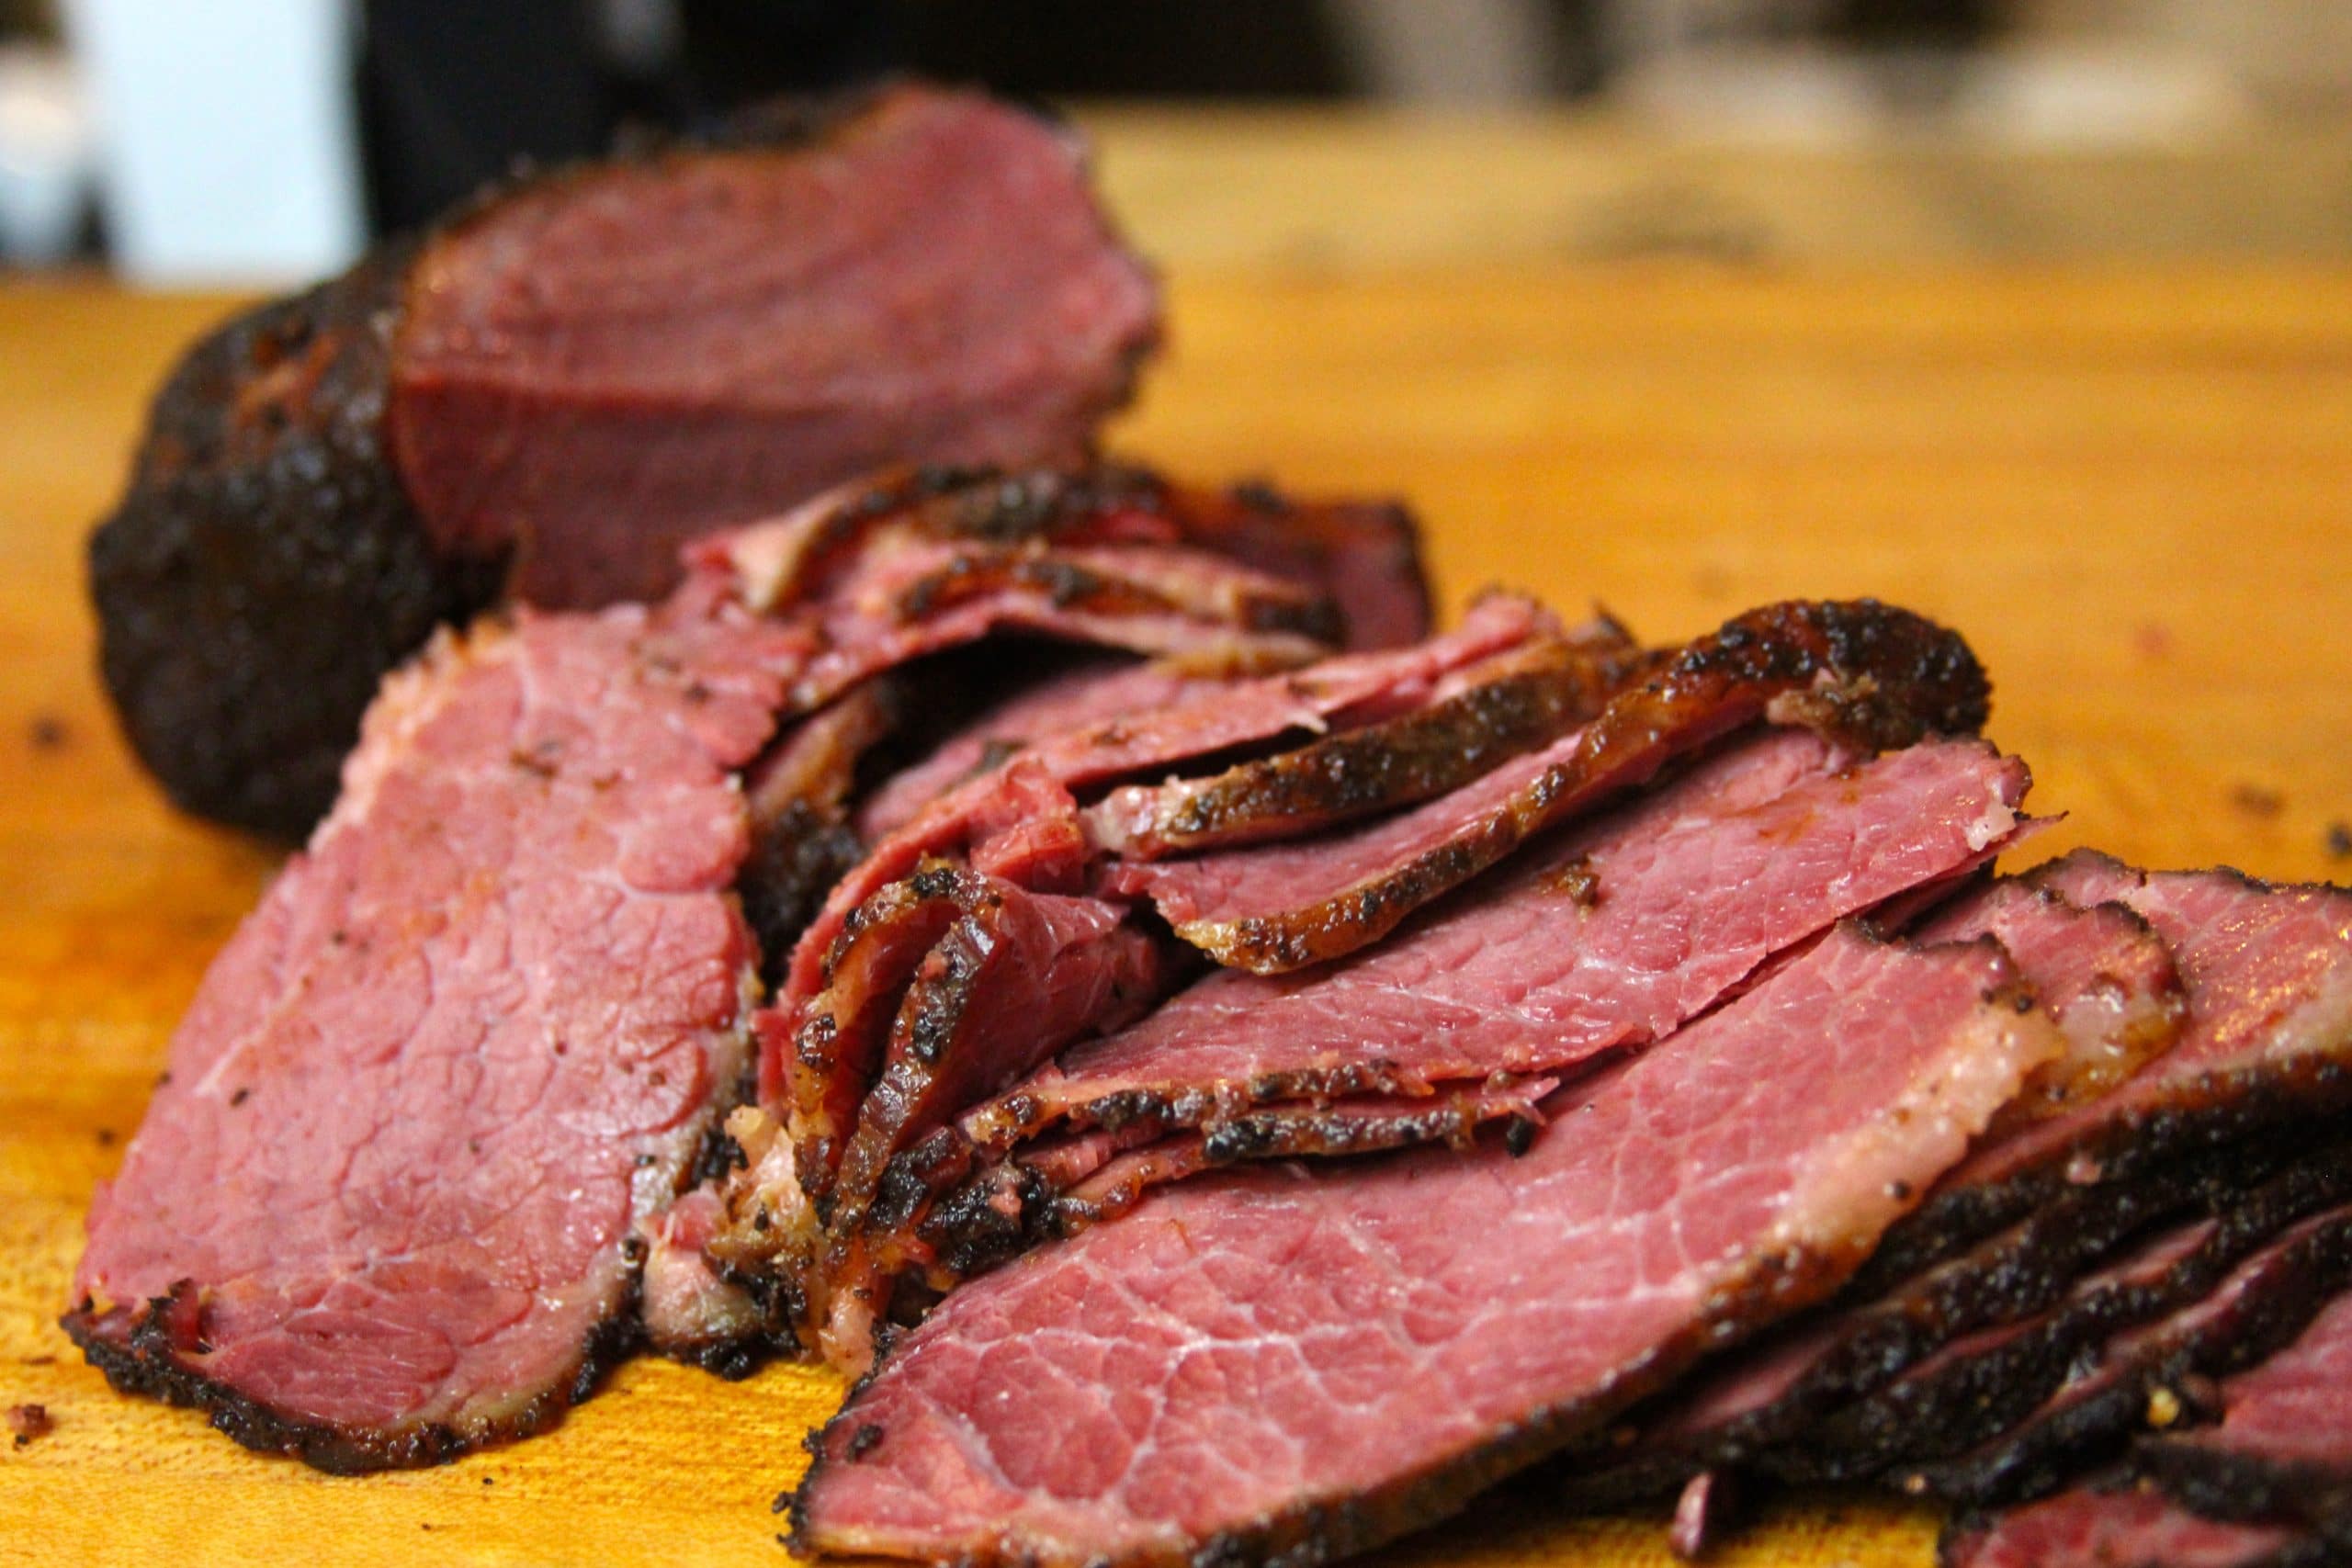 Sliced sous vide and smoked pastrami